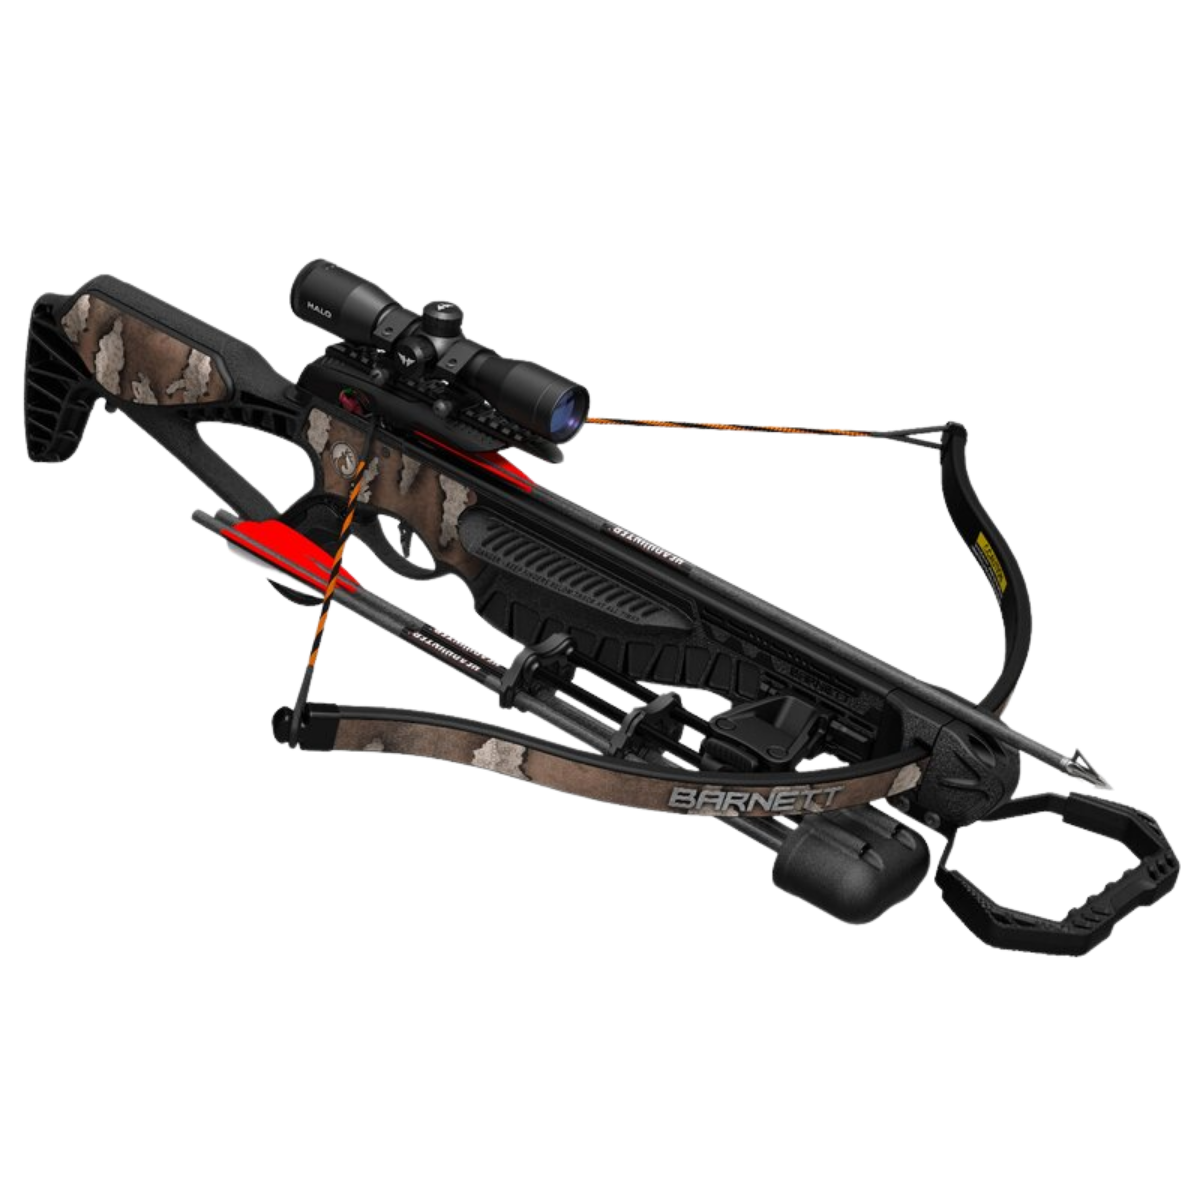 Barnett Wildcat Recurve Crossbow Package 260fps - Fast UK Shipping | Tactical Archery UK